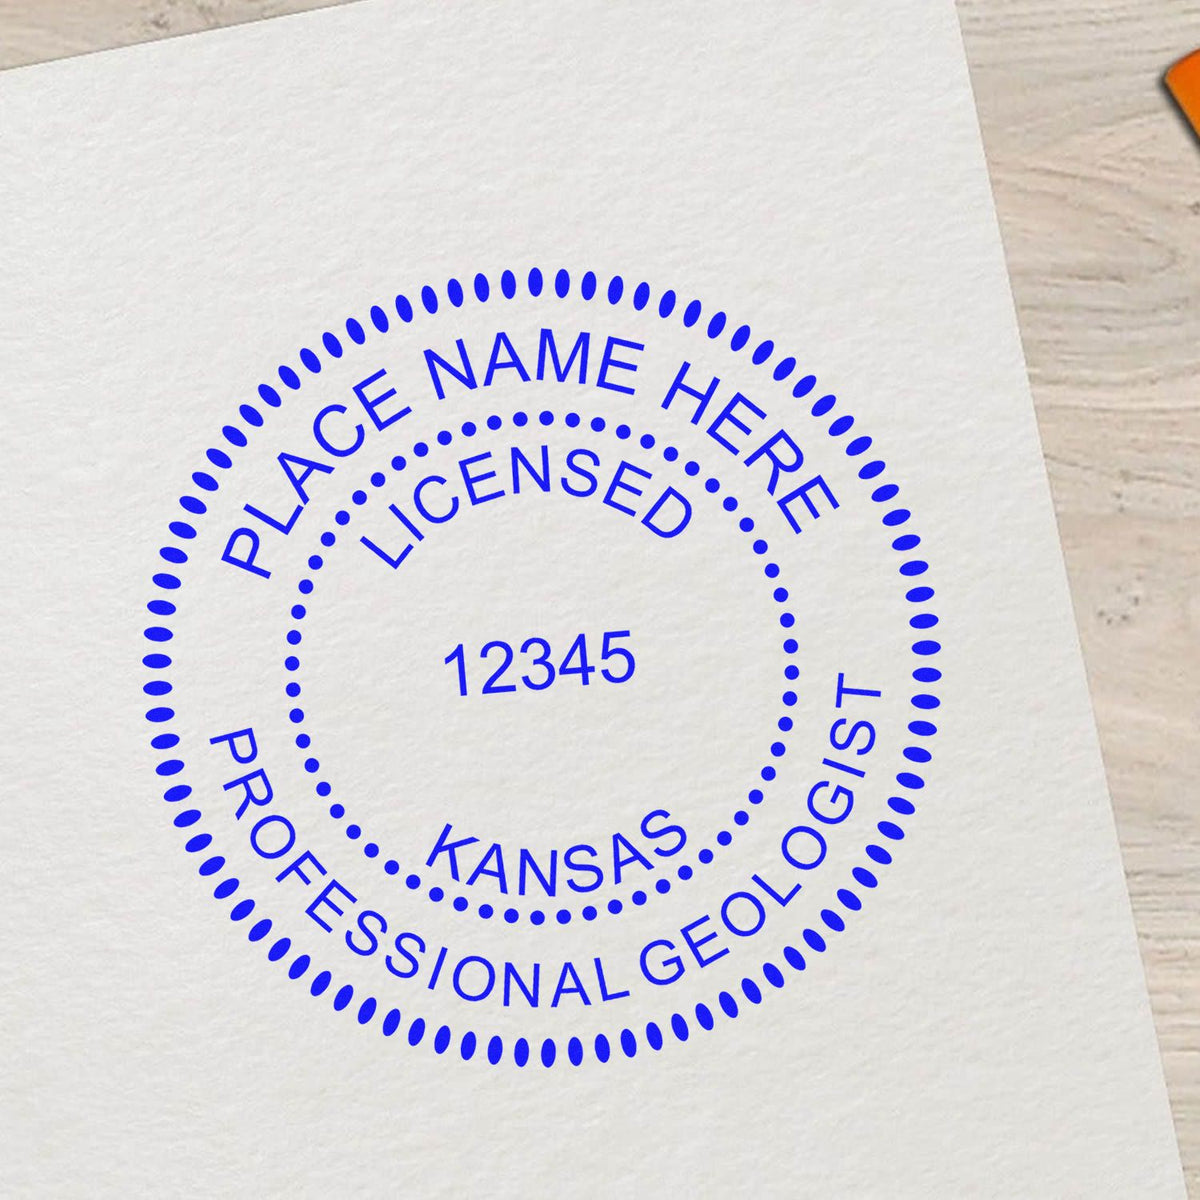 An alternative view of the Slim Pre-Inked Kansas Professional Geologist Seal Stamp stamped on a sheet of paper showing the image in use